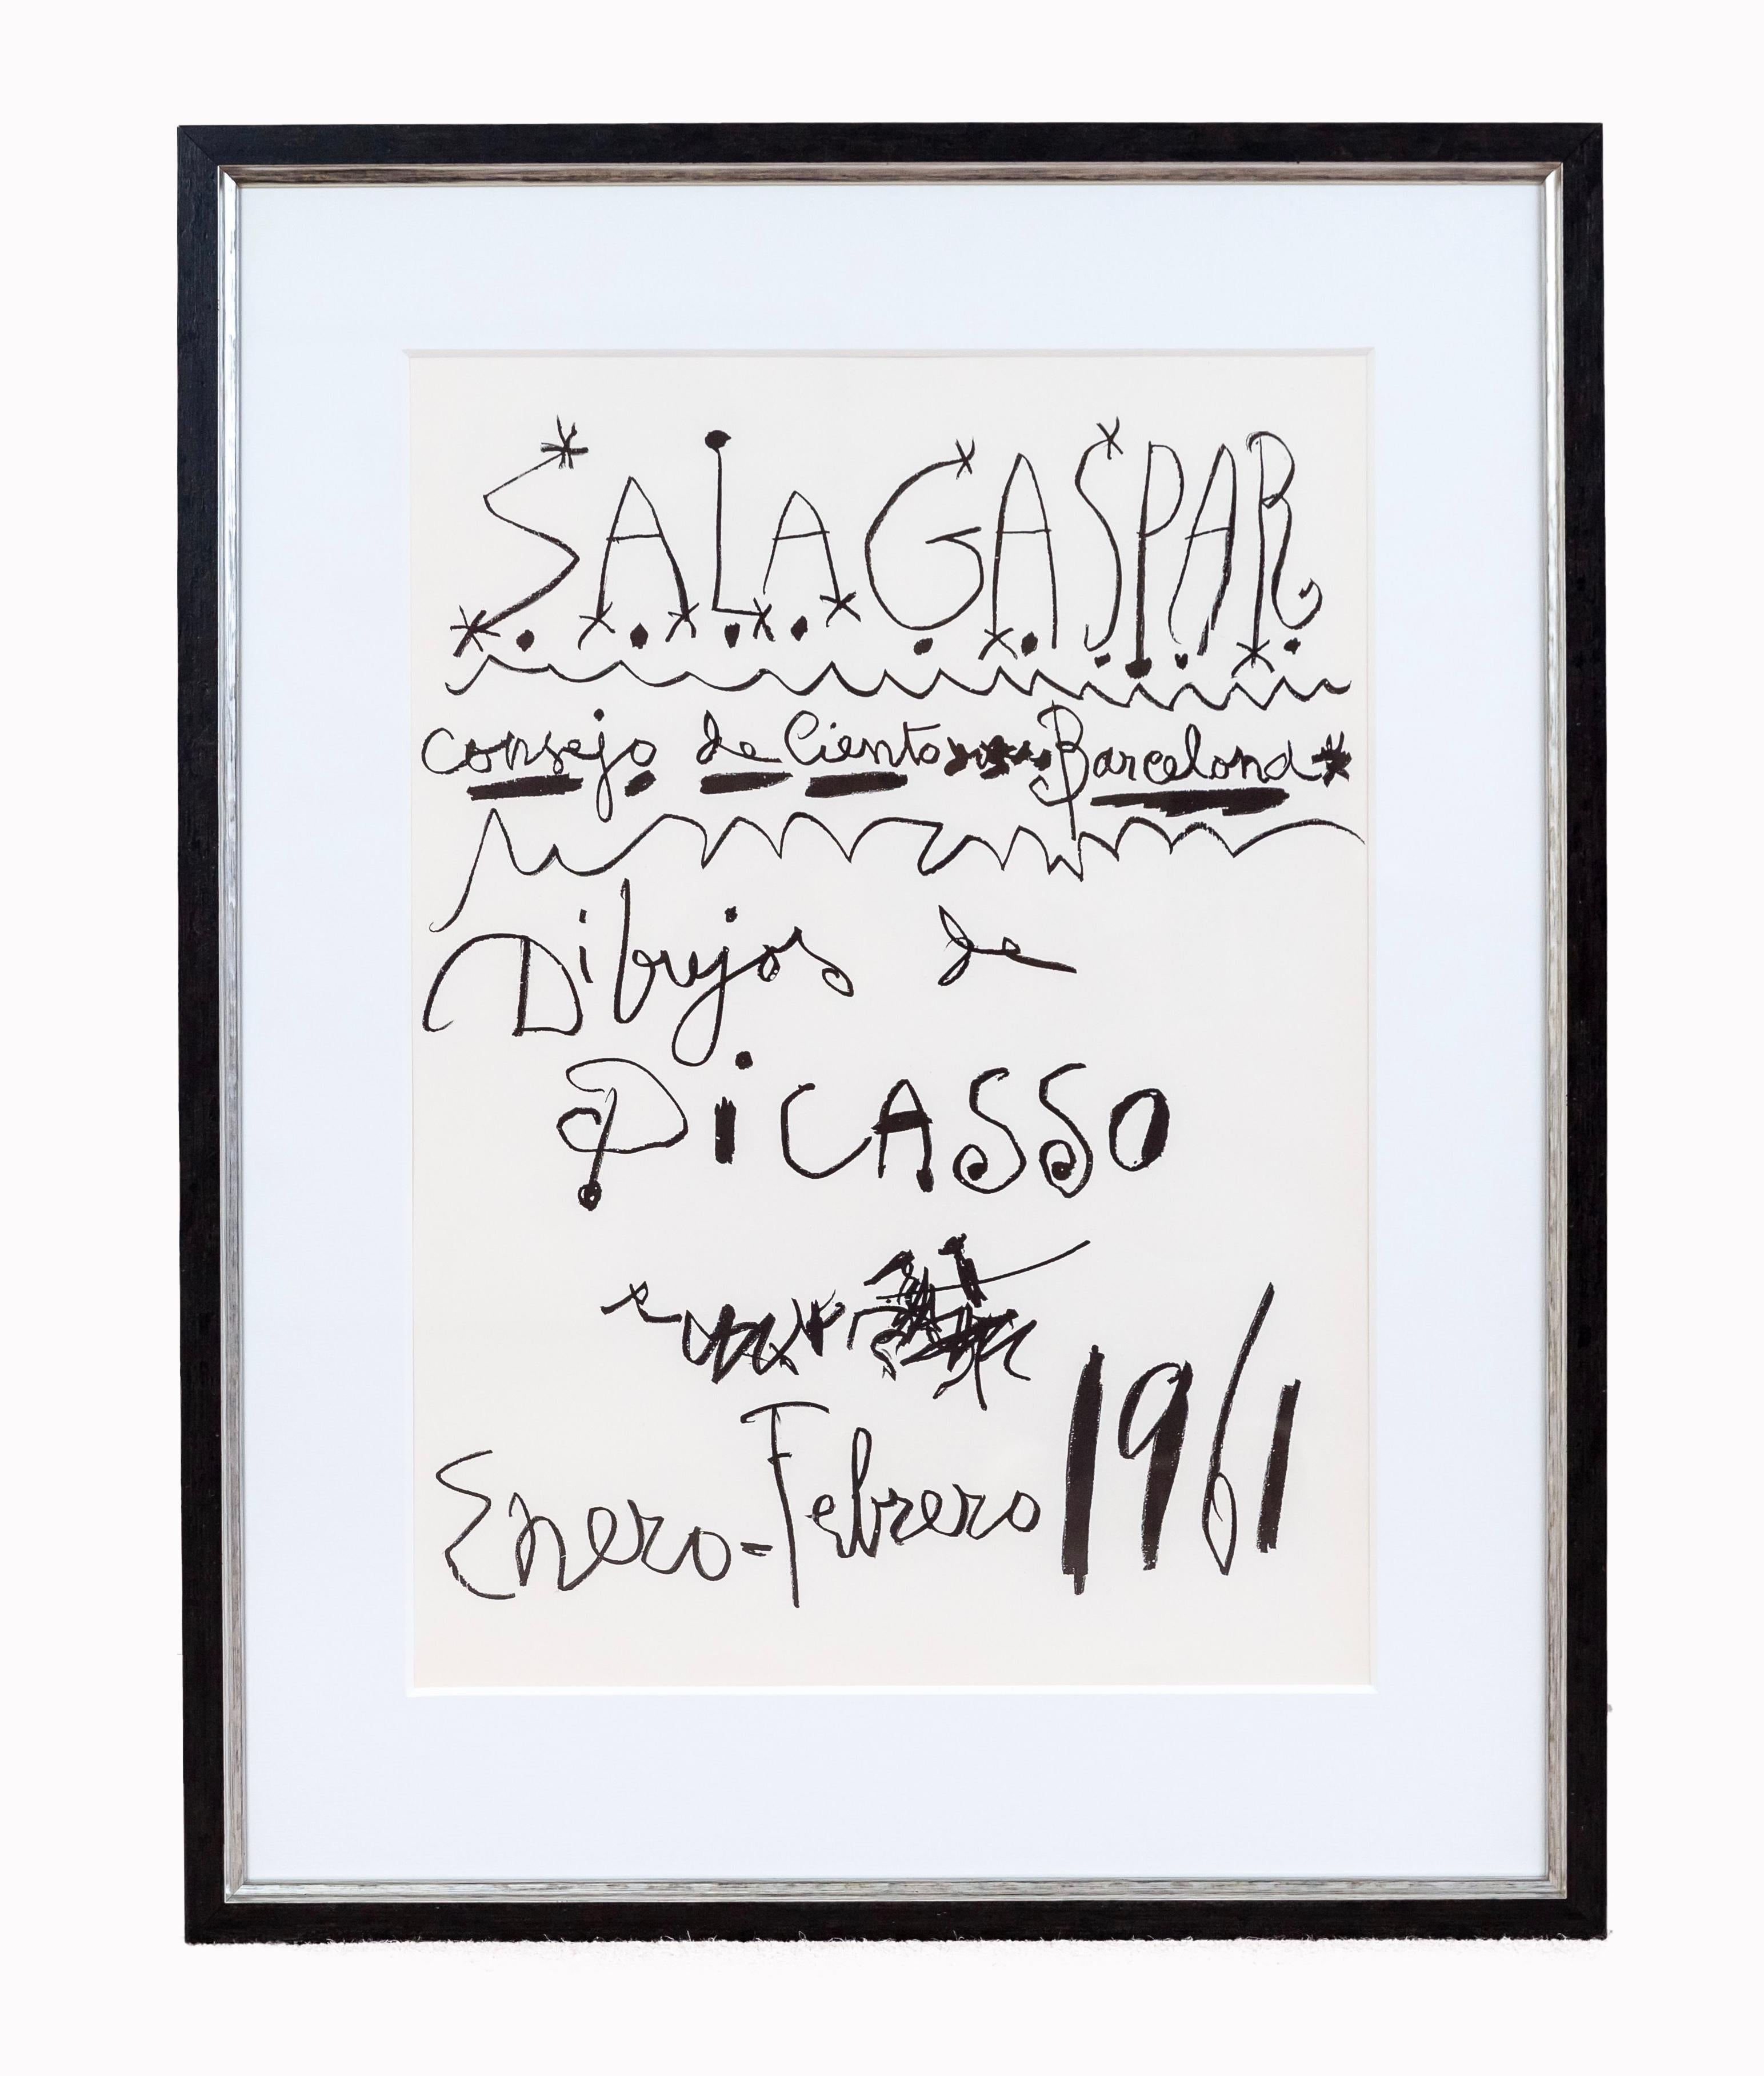 Picasso
90 x 70 cm
Lithography Poster
£1500

Lithography poster by Pablo Picaso, 1961. Made by himself as the poster of his exhibition on the Gallery "Sala Gaspar" in Barcelona.  Limited edition of 500. In good original condition.  Pablo Picasso